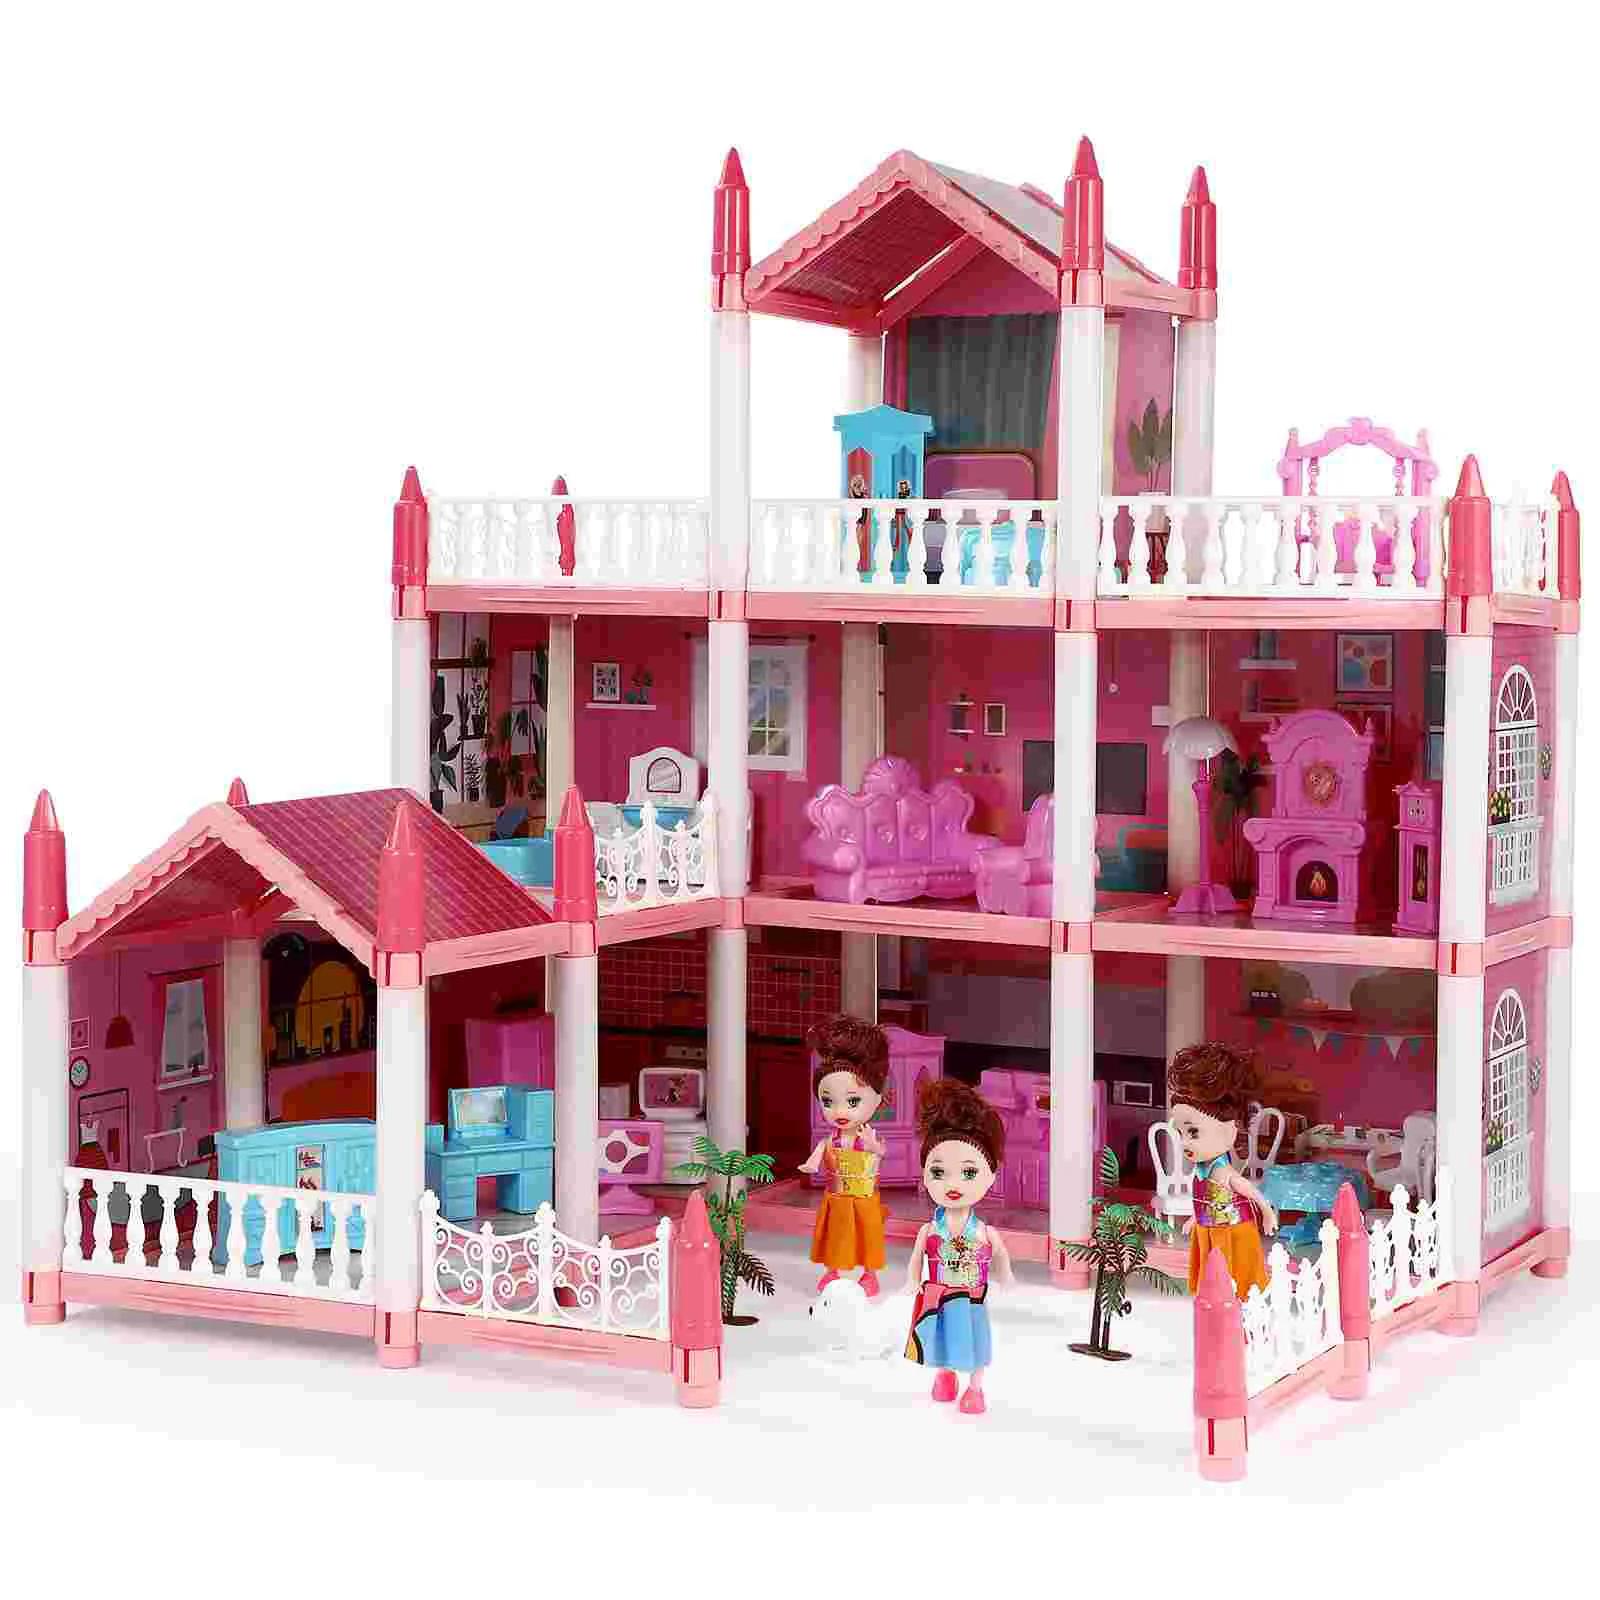 Girl Children's Play House Toy Girl's Imitation 9 Rooms Pink Princess Toys Pp With 3 Stories only fools and stories